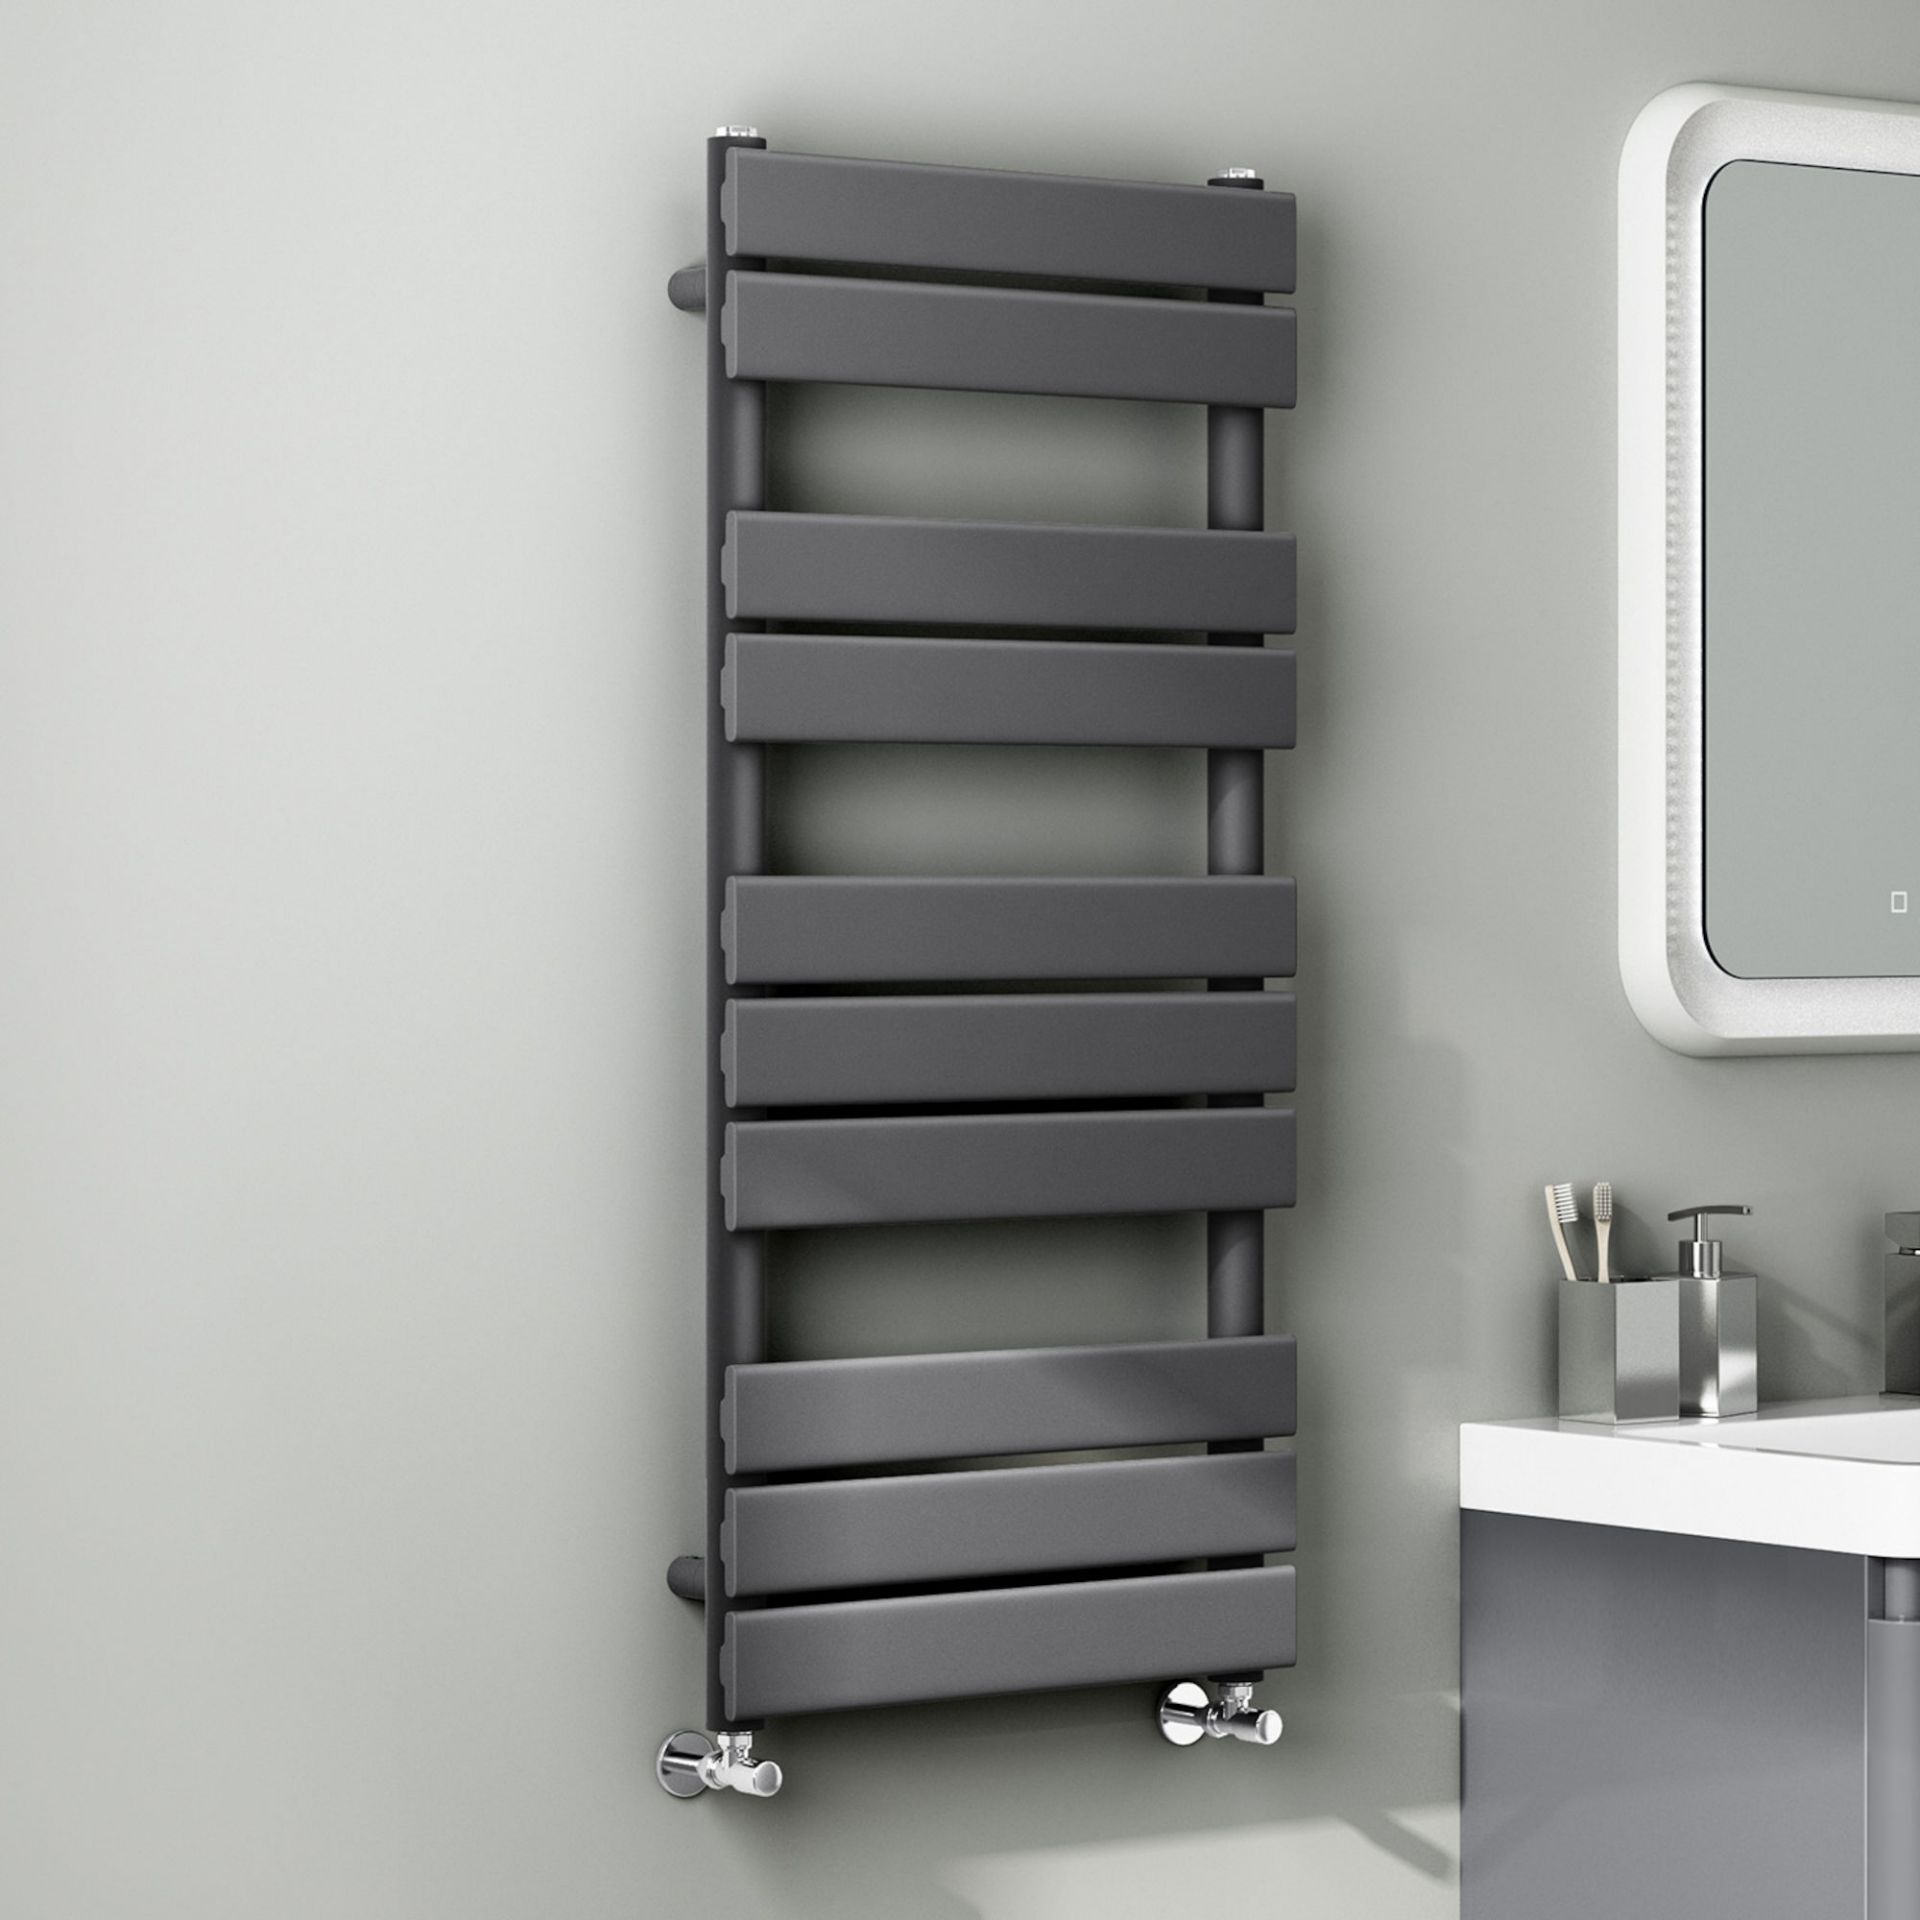 (PT255) 1000x450mm Anthracite Flat Panel Ladder Towel Radiator. RRP £119.99. Made with low carbon